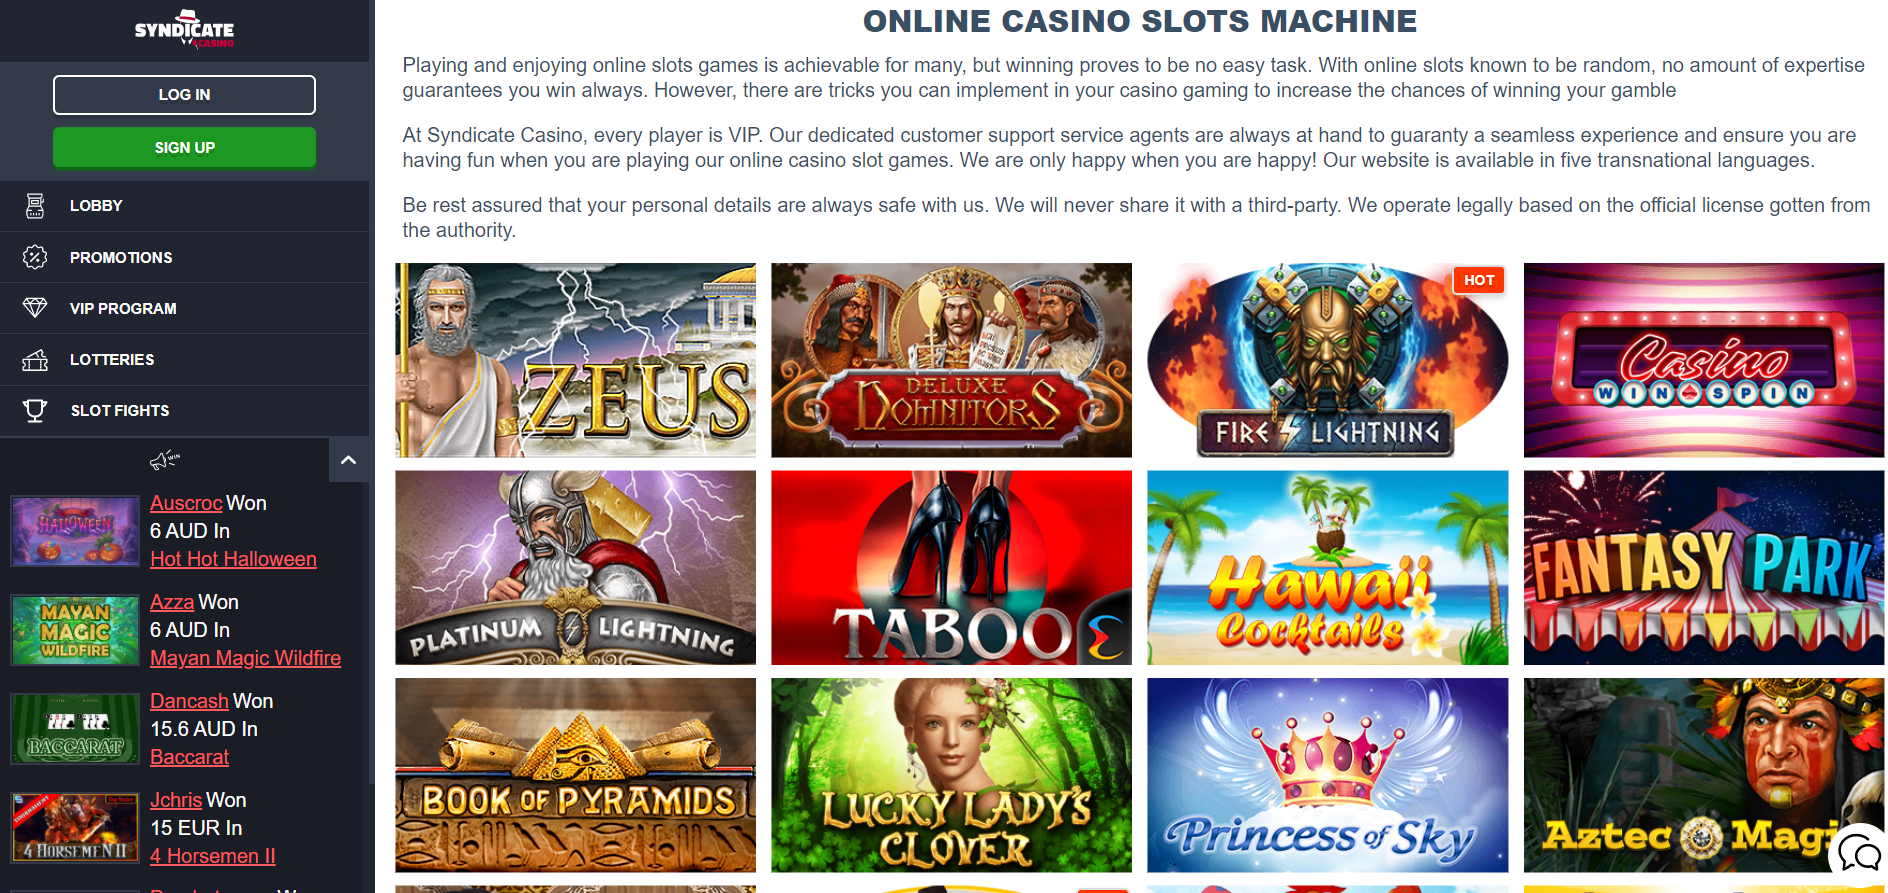 syndicate.casino login An Incredibly Easy Method That Works For All